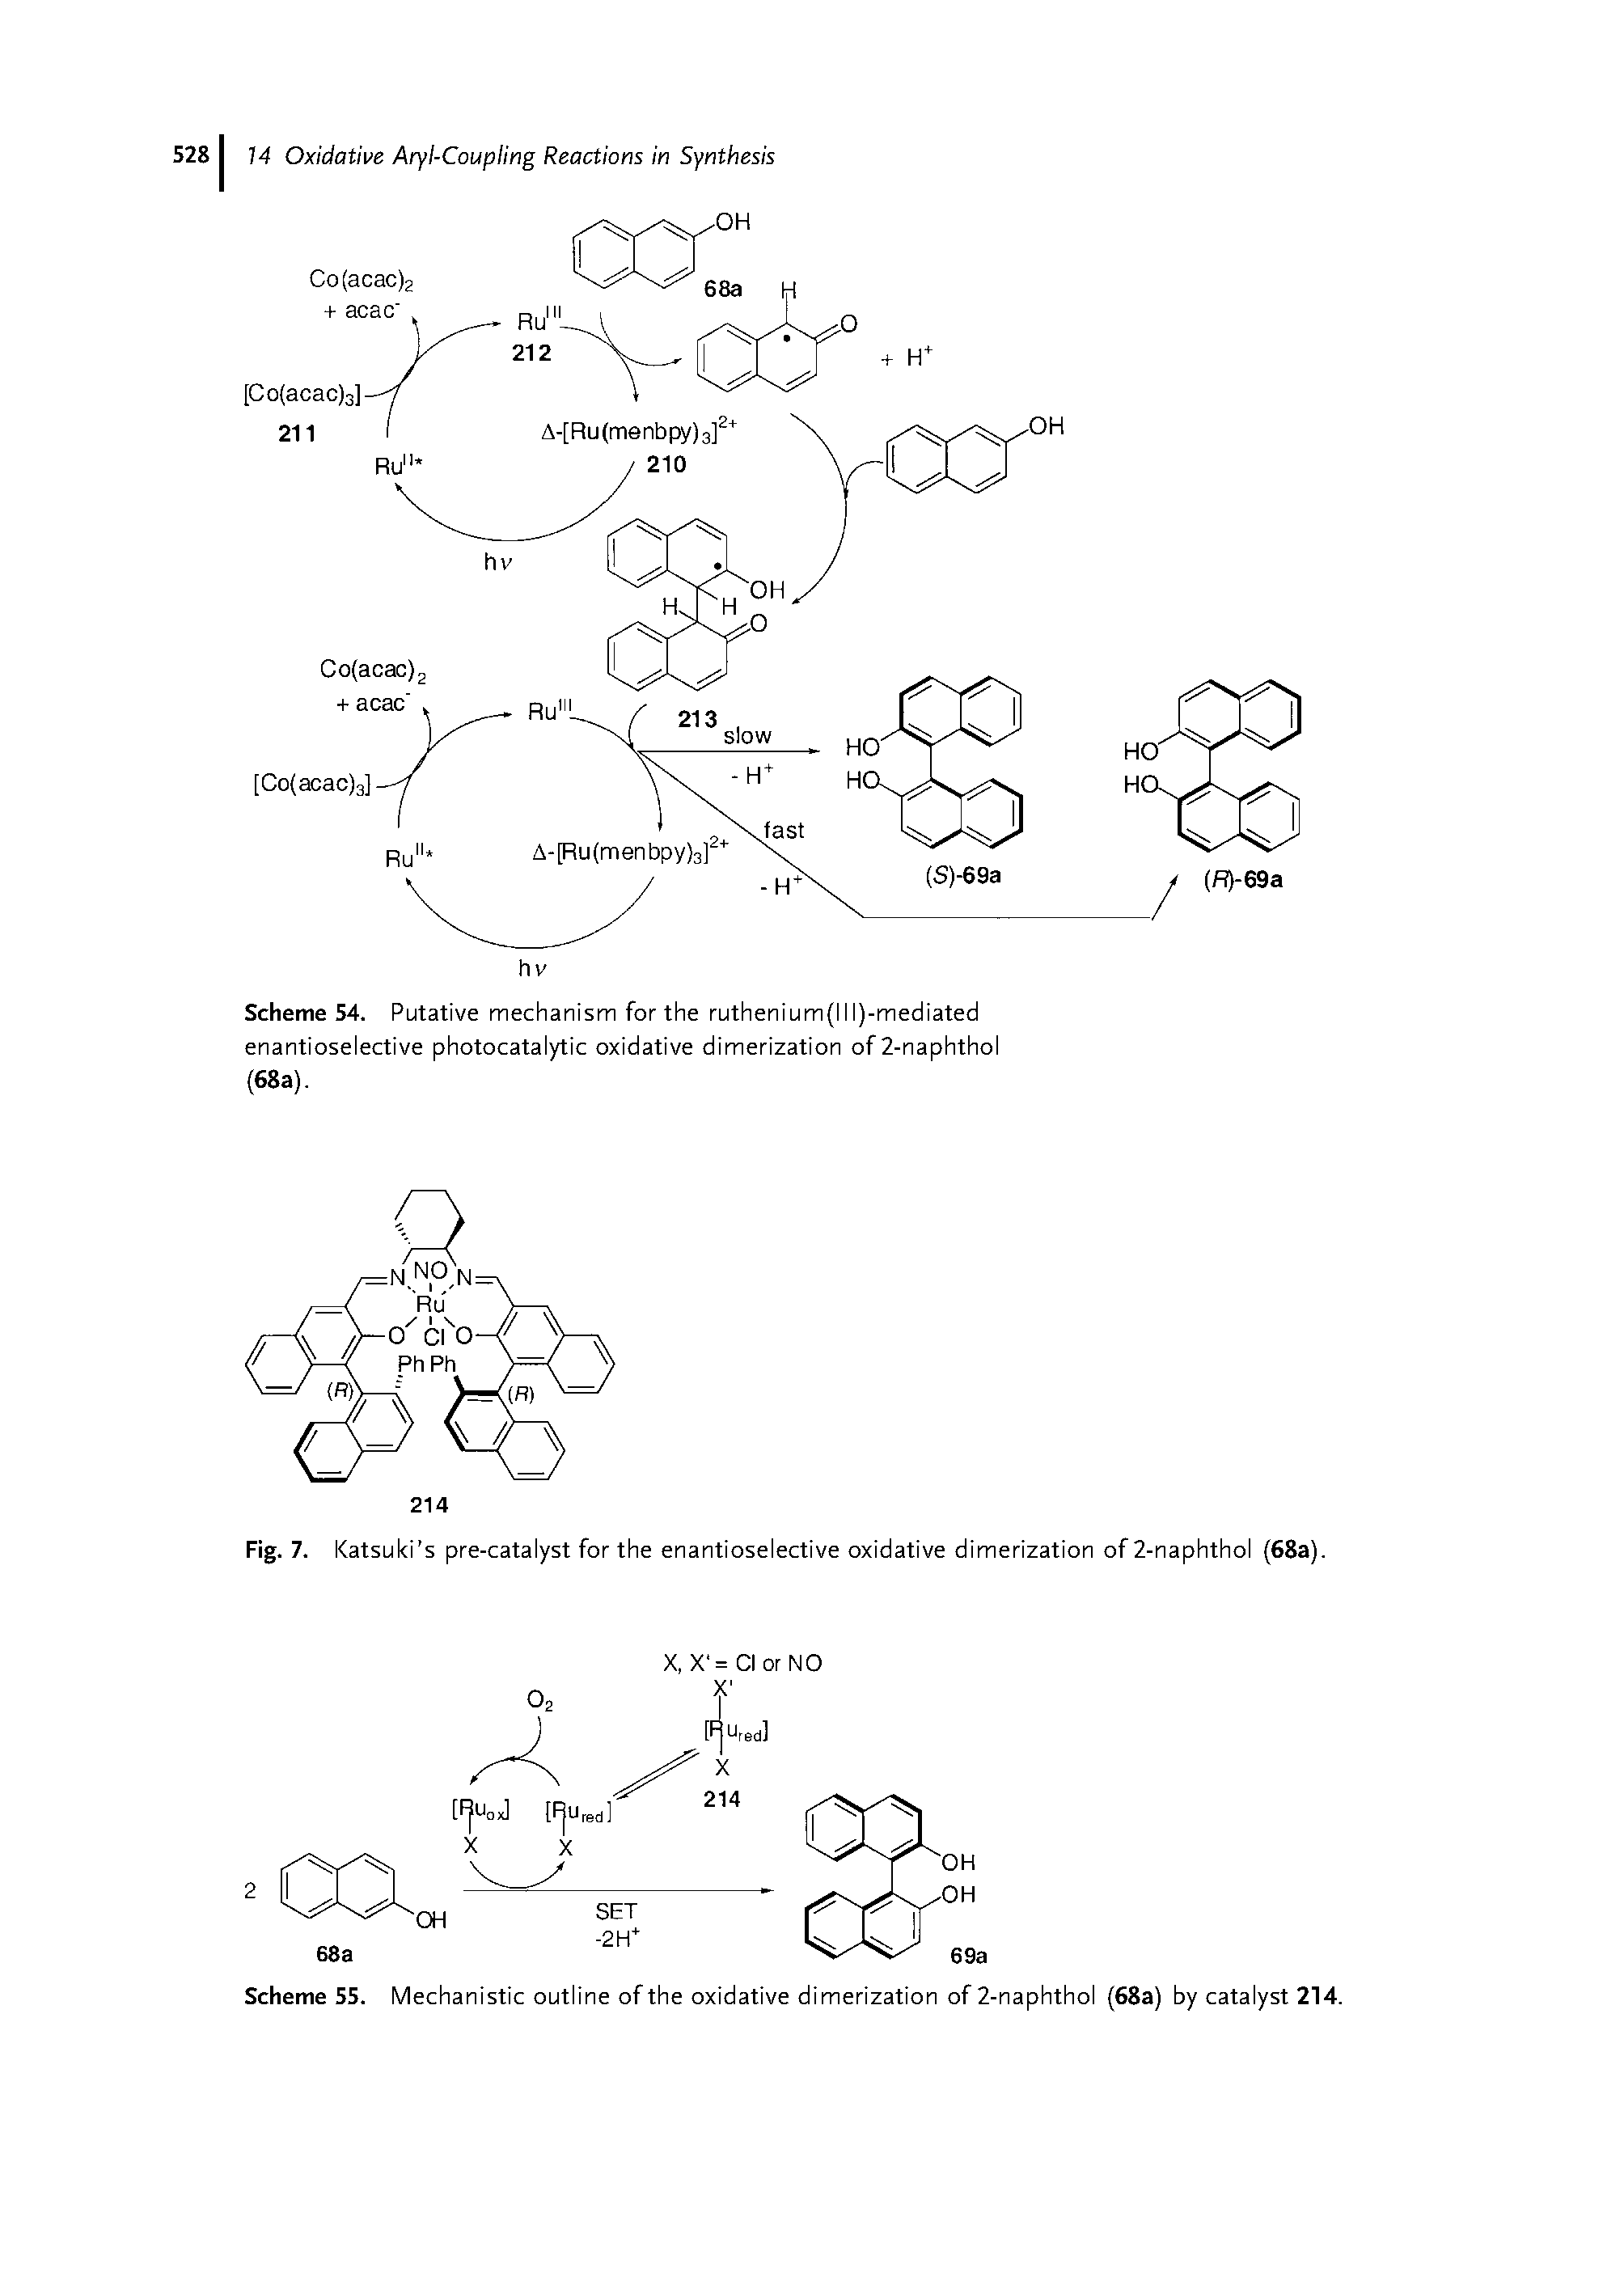 Fig. 7. Katsuki s pre-catalyst for the enantioselective oxidative dimerization of 2-naphthol (68a).